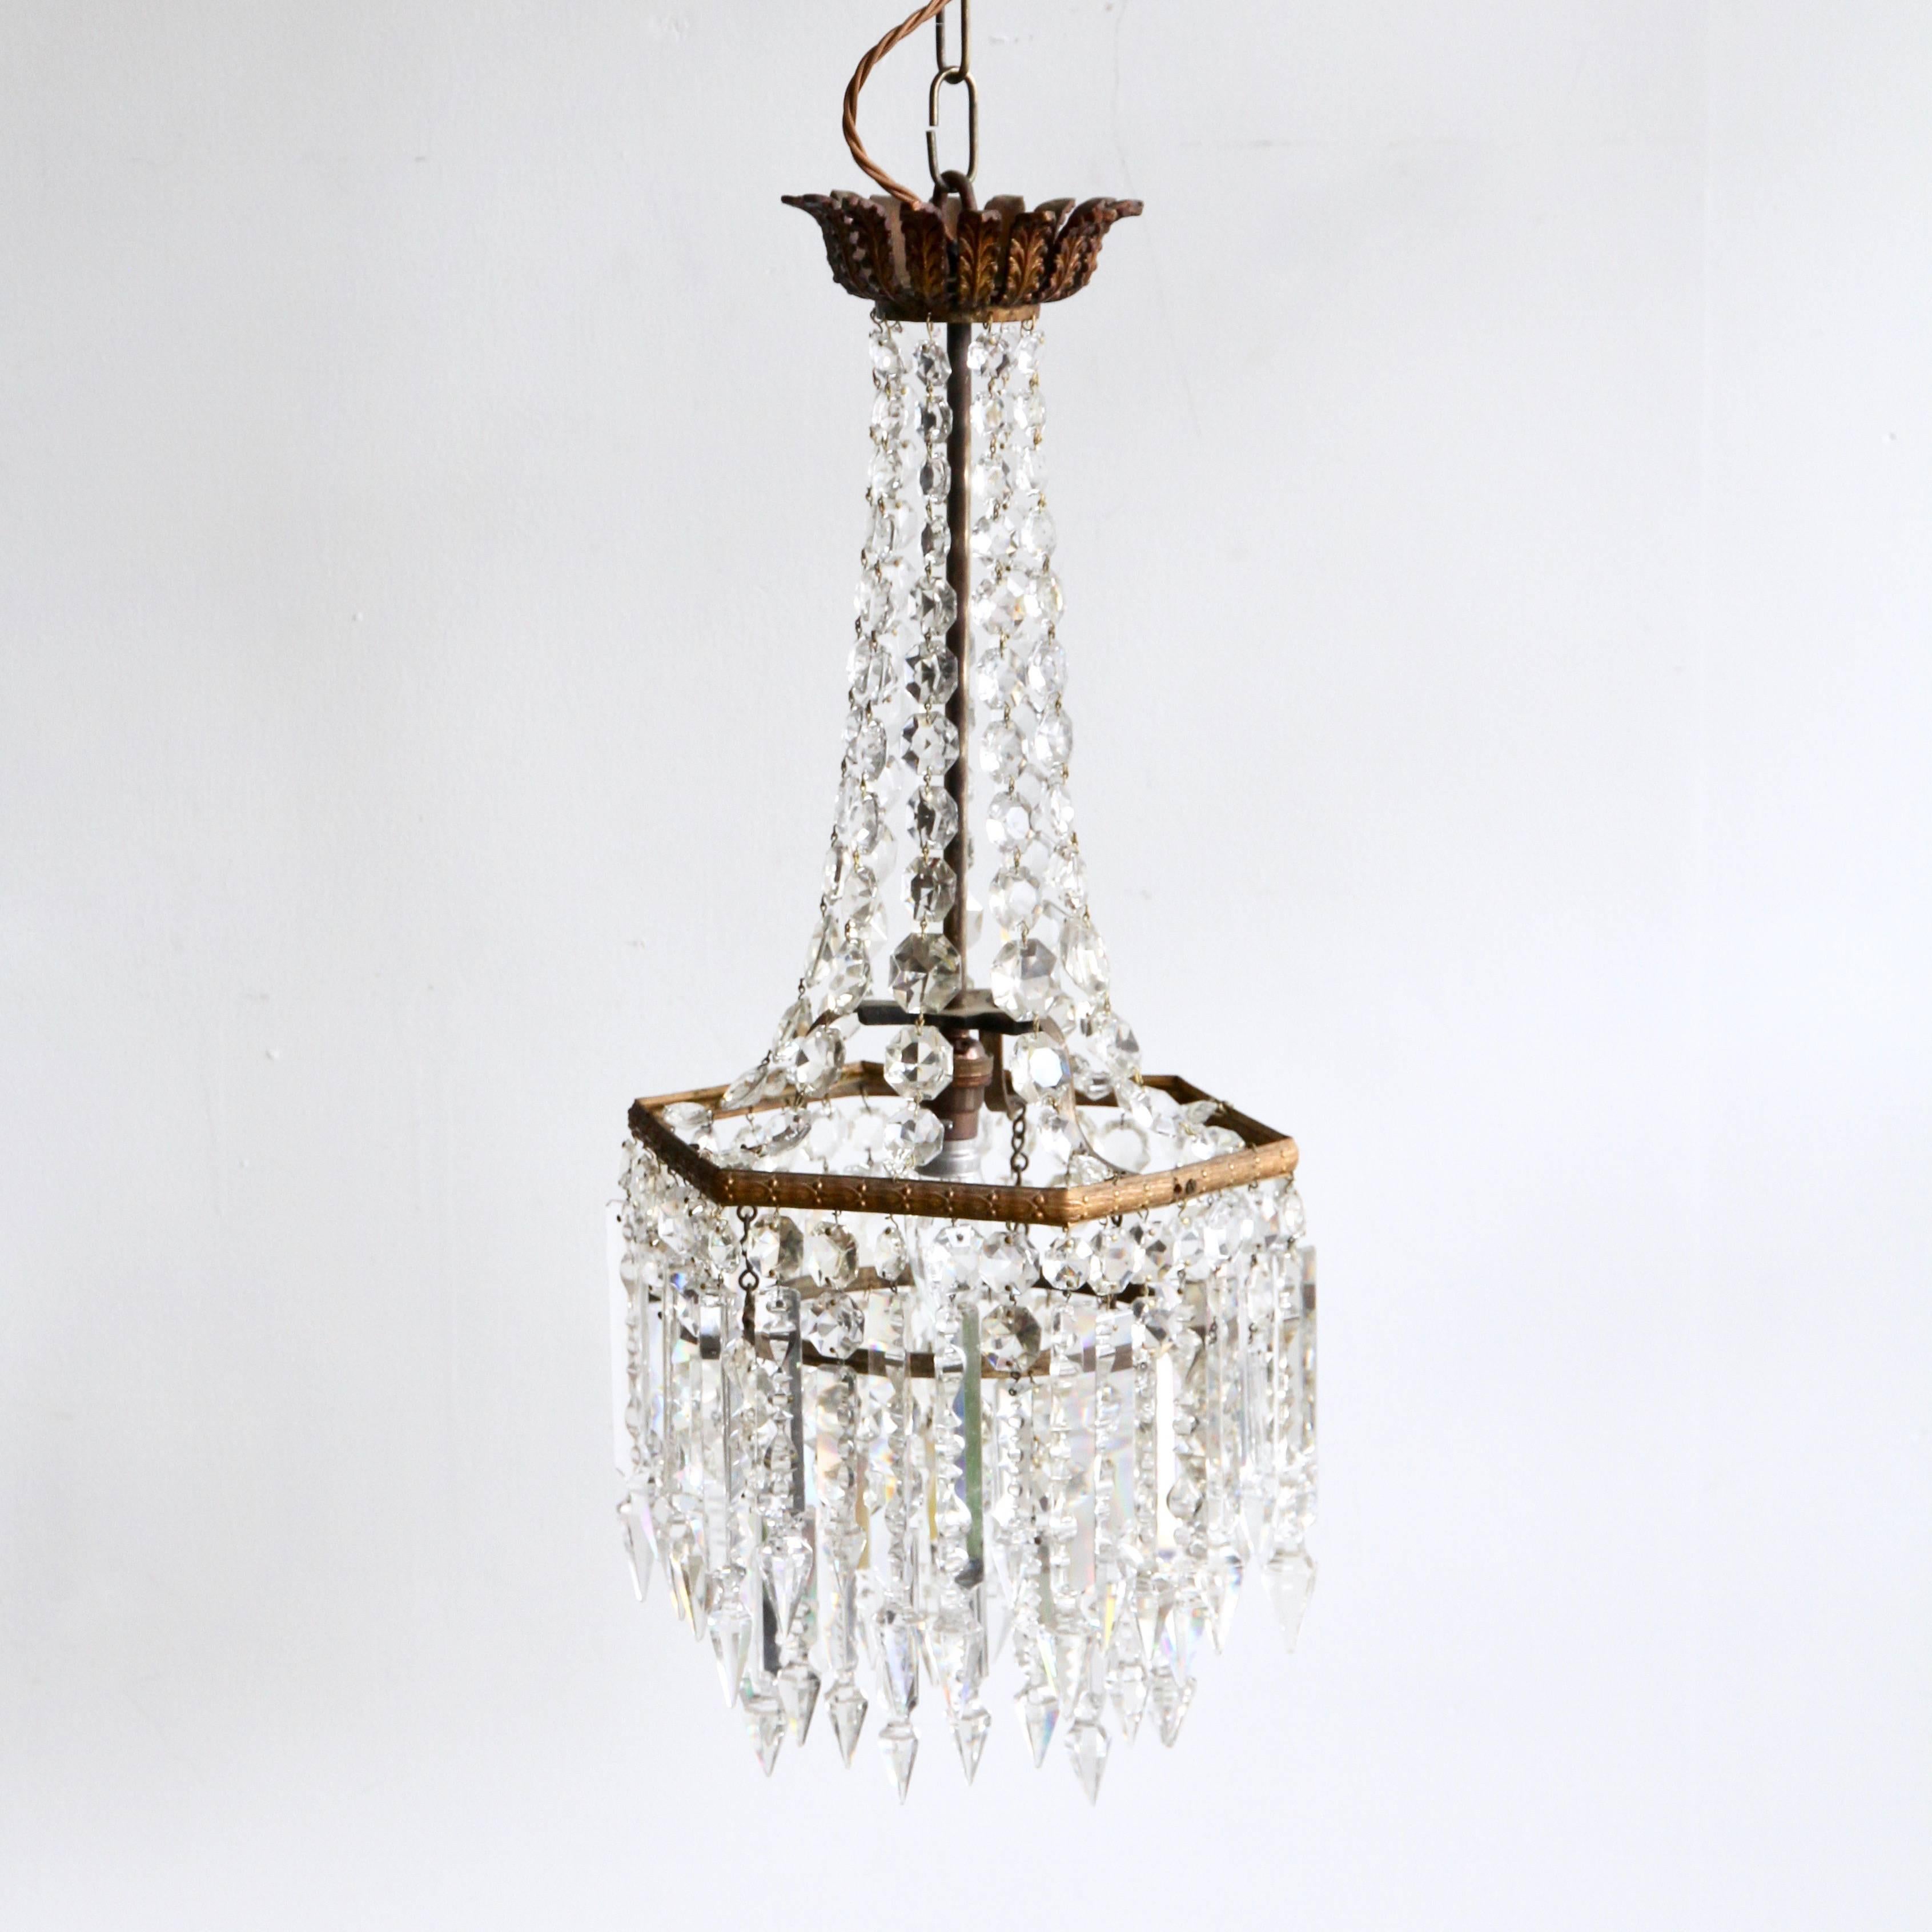 Early 20th Century English Crystal Chandelier with Prince Albert Crystal Lusters 6